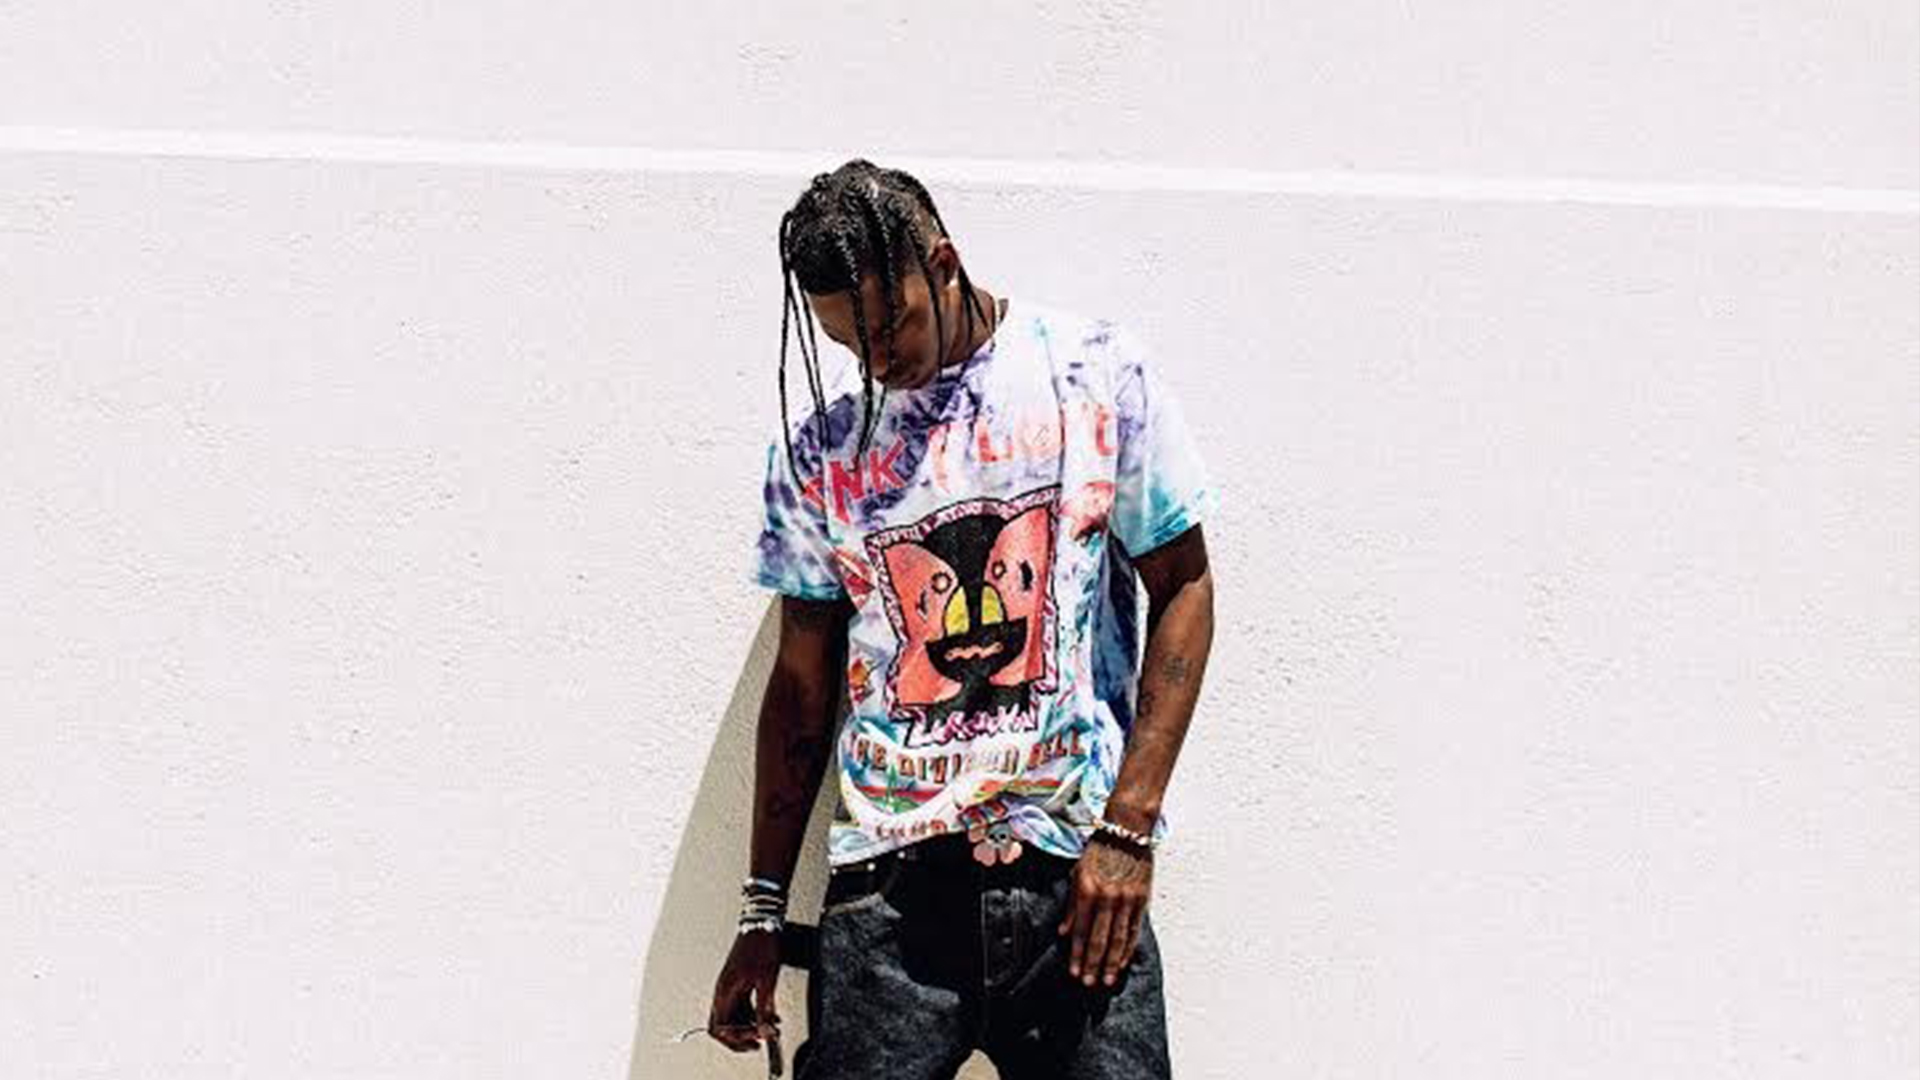 Watch Travis Scott and Ludwig Göransson Break Down How They Made "The Plan" for 'Tenet'